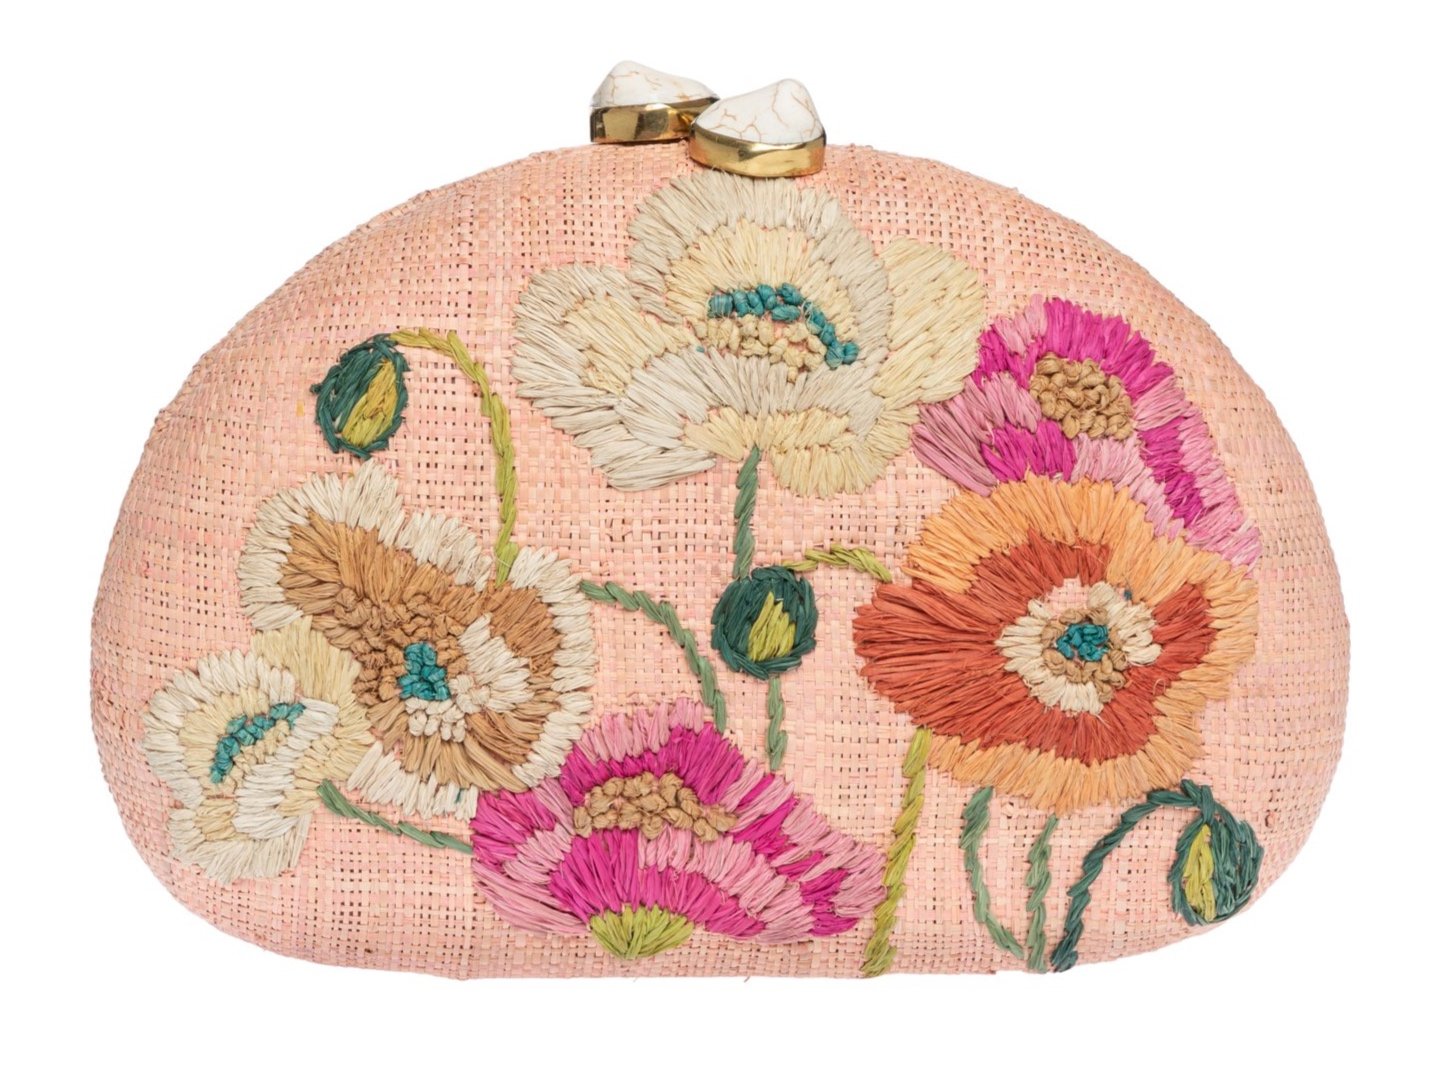 Petite pink bag with colorful patterned fabric designed by Mofa Barcelona